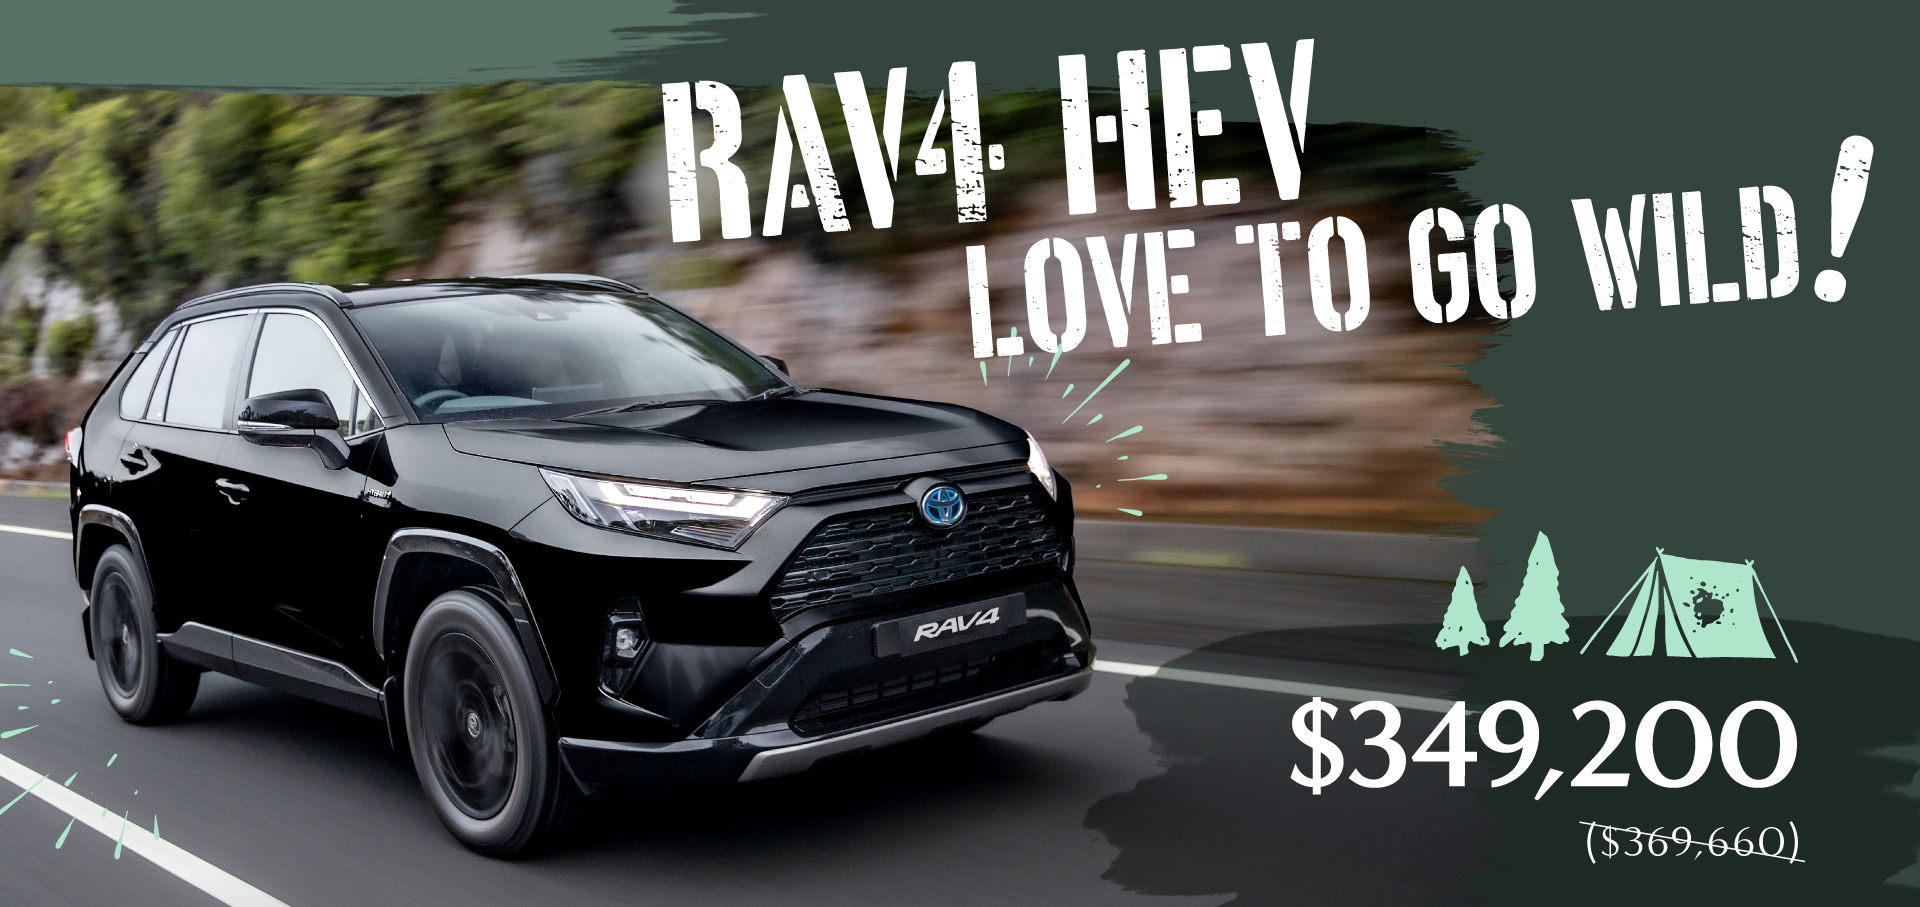 LOVE TO GO WILD｜SUV RAV4 HEV is at $349,200